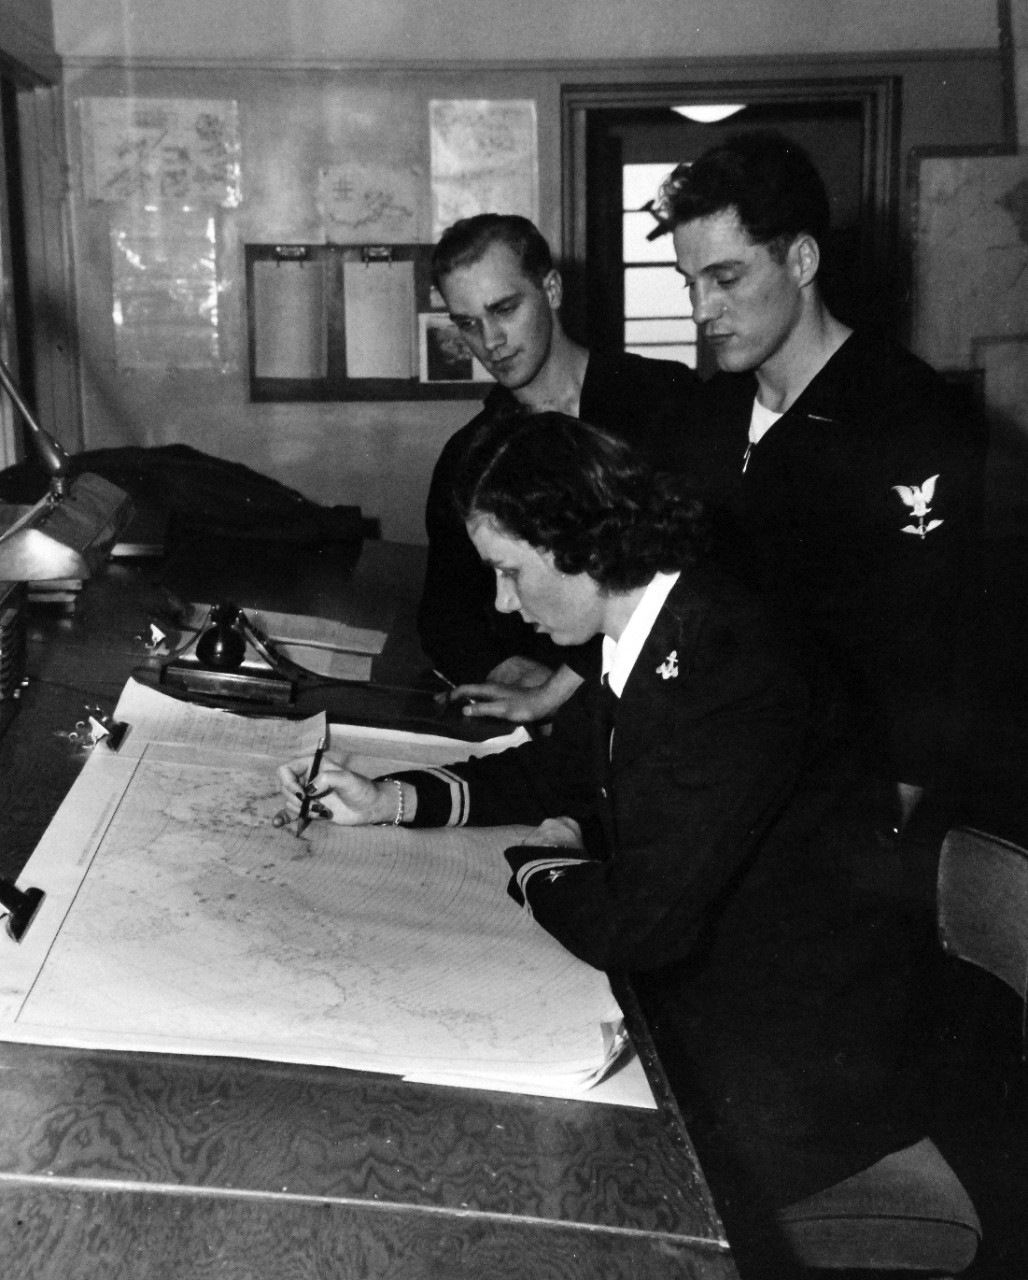 80-G-279809:  U.S. Naval Air Station, Kodiak, Alaska, 1944.    Lieutenant Junior Grade Marguerite F. Hunold, USNR, the first WAVE to arrive at the station, studying a map in the office of Fleet Weather Central.  Photographed by PhoM2/C R.K. Thomas, released October 29, 1944.    U.S. Navy Photograph now in the collections of the National Archives.  (2016/01/19).